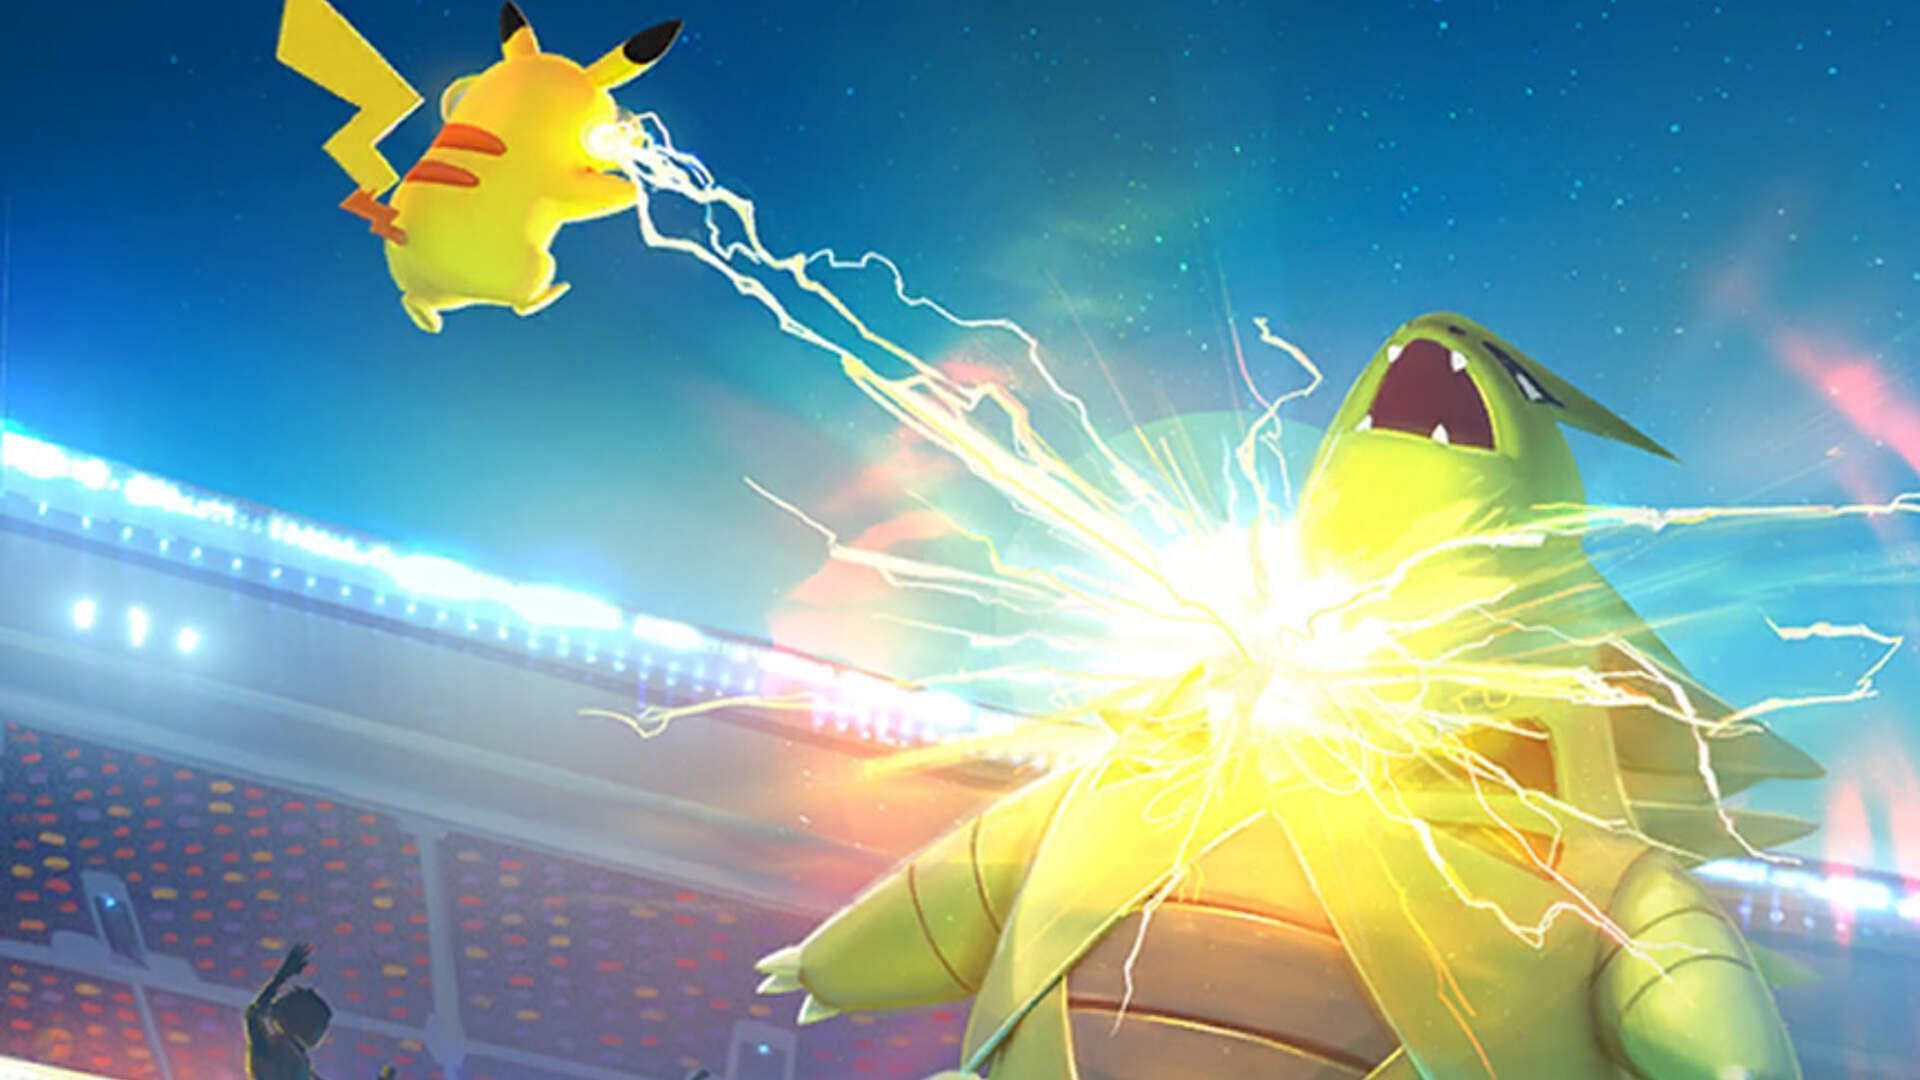 Official imagery for Raids in Pokemon GO (Image via Niantic)